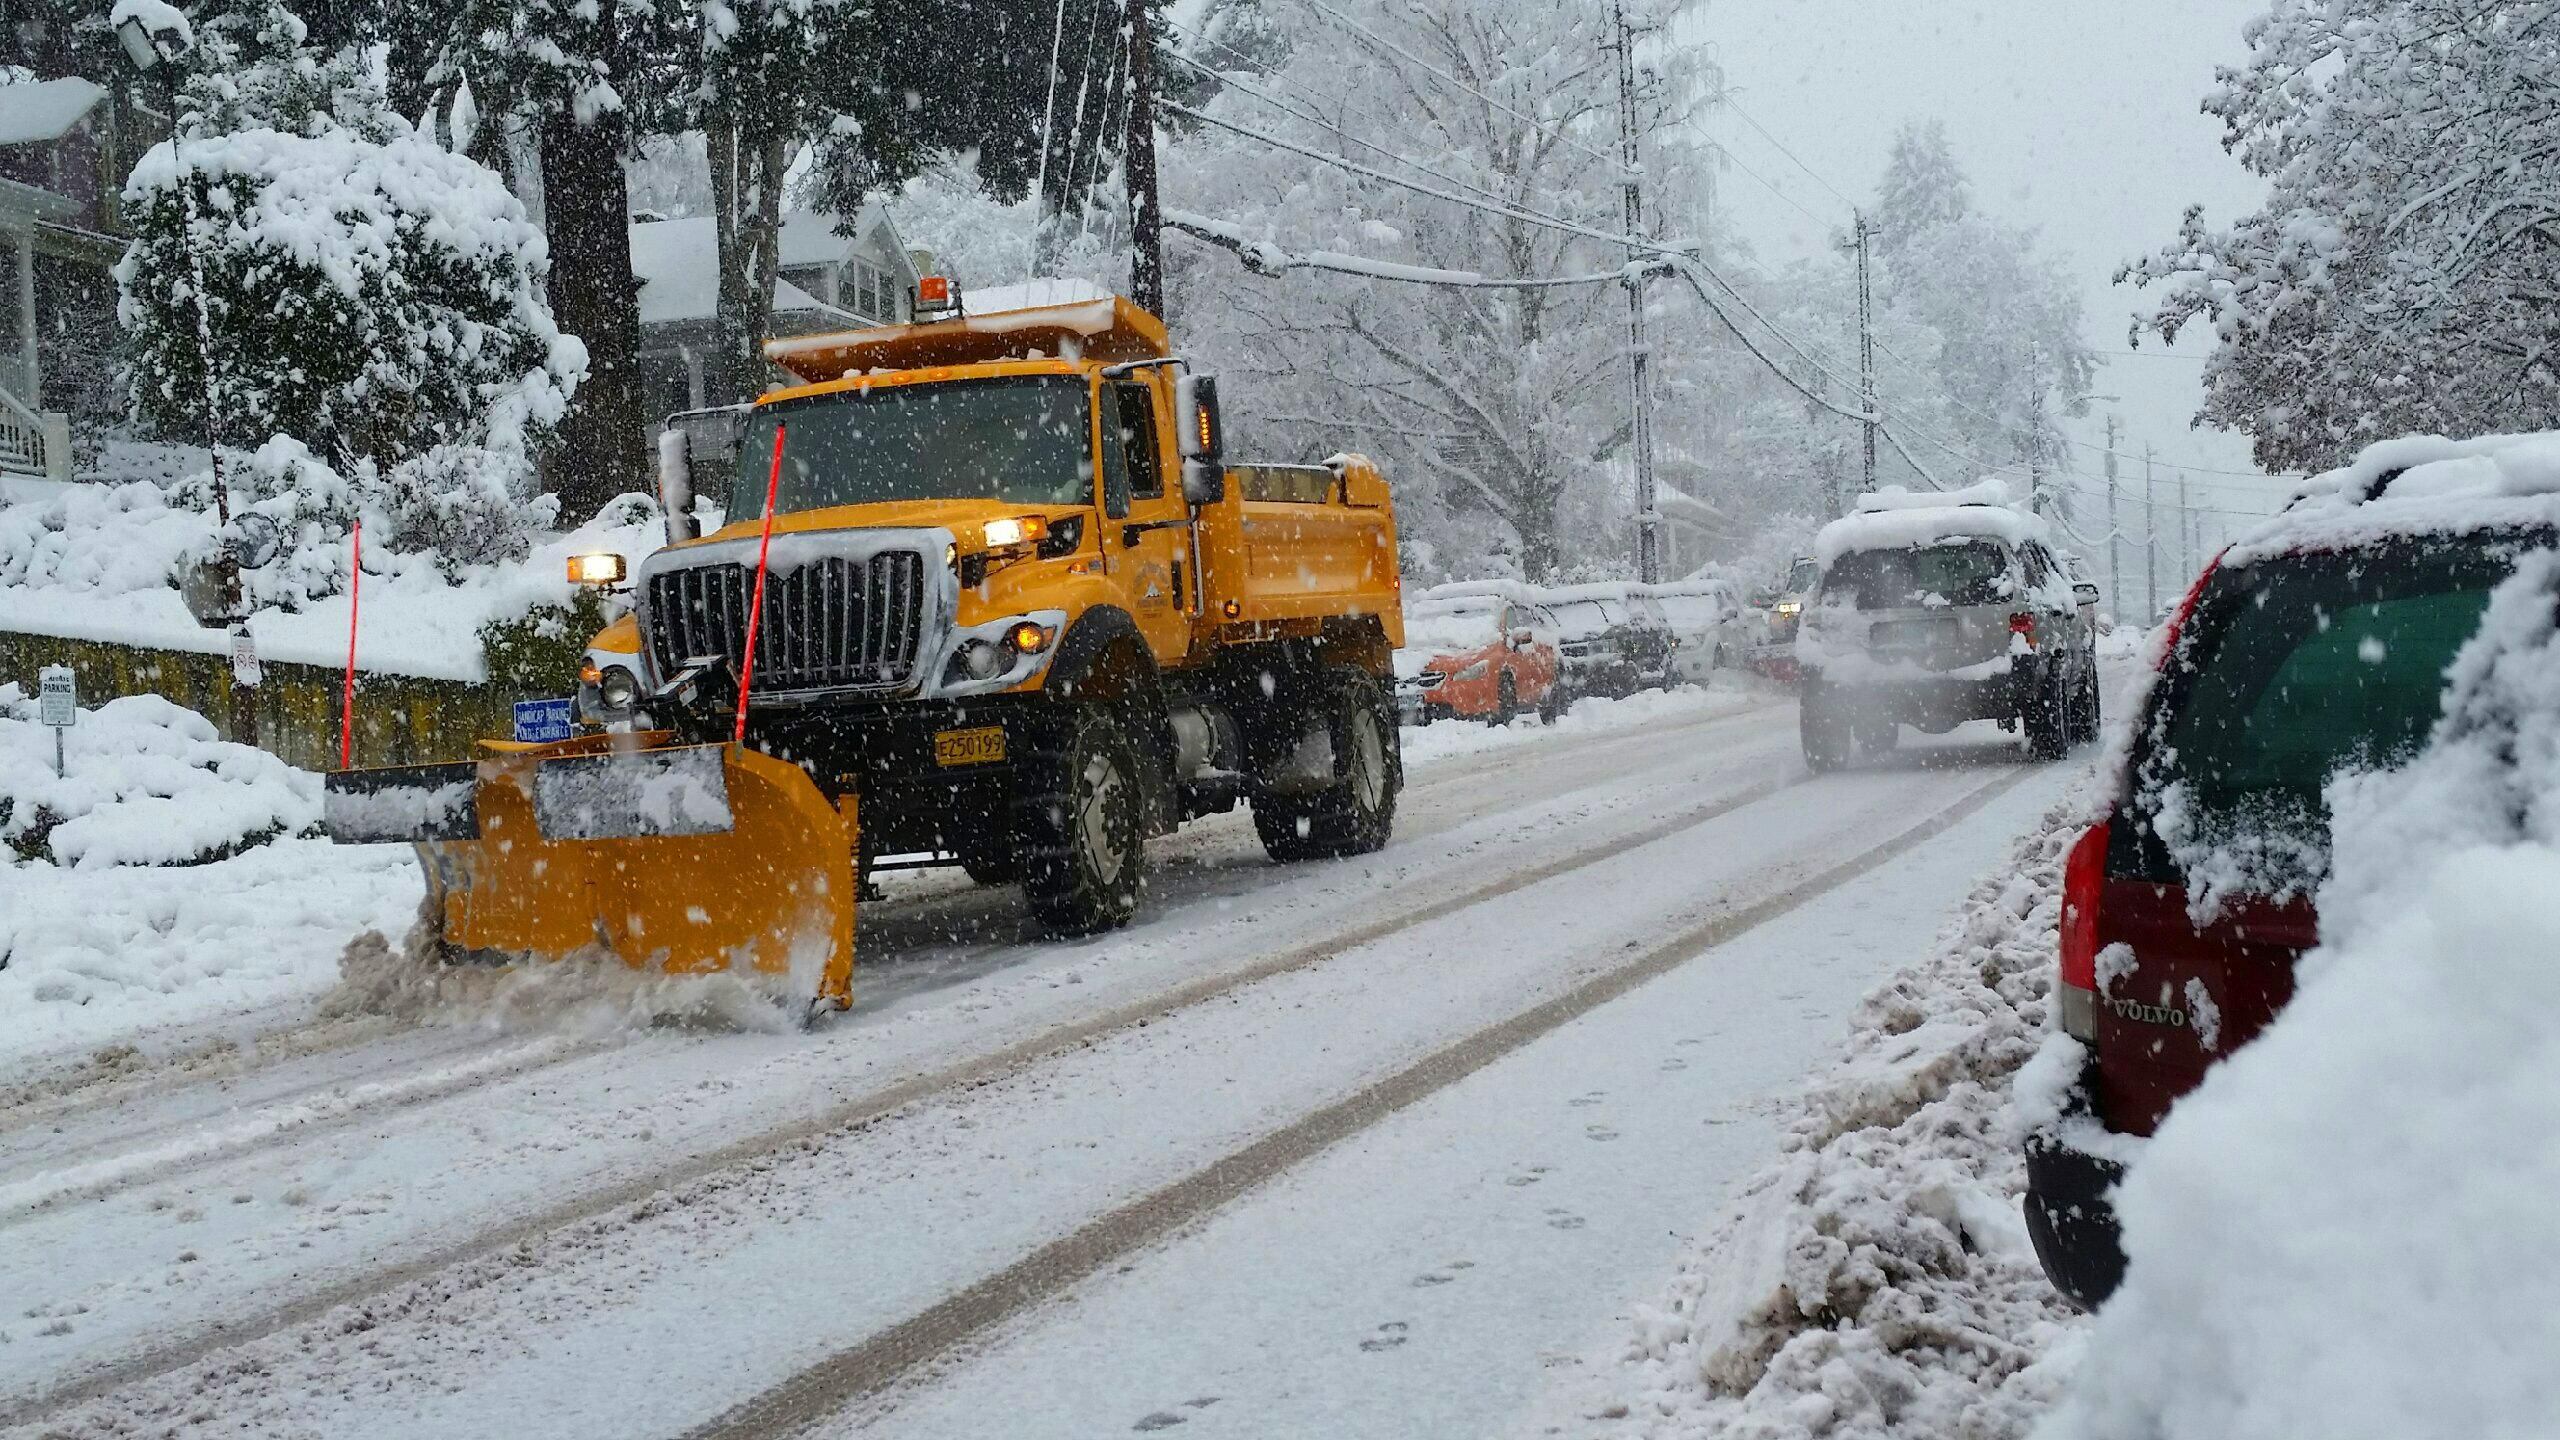 A snow plow works on clearing State Street in downtown Hood River, Ore., last December. The Oregon Department of Transportation is hiring to fill 167 vacant positions, of which 146 are snow plow drivers.